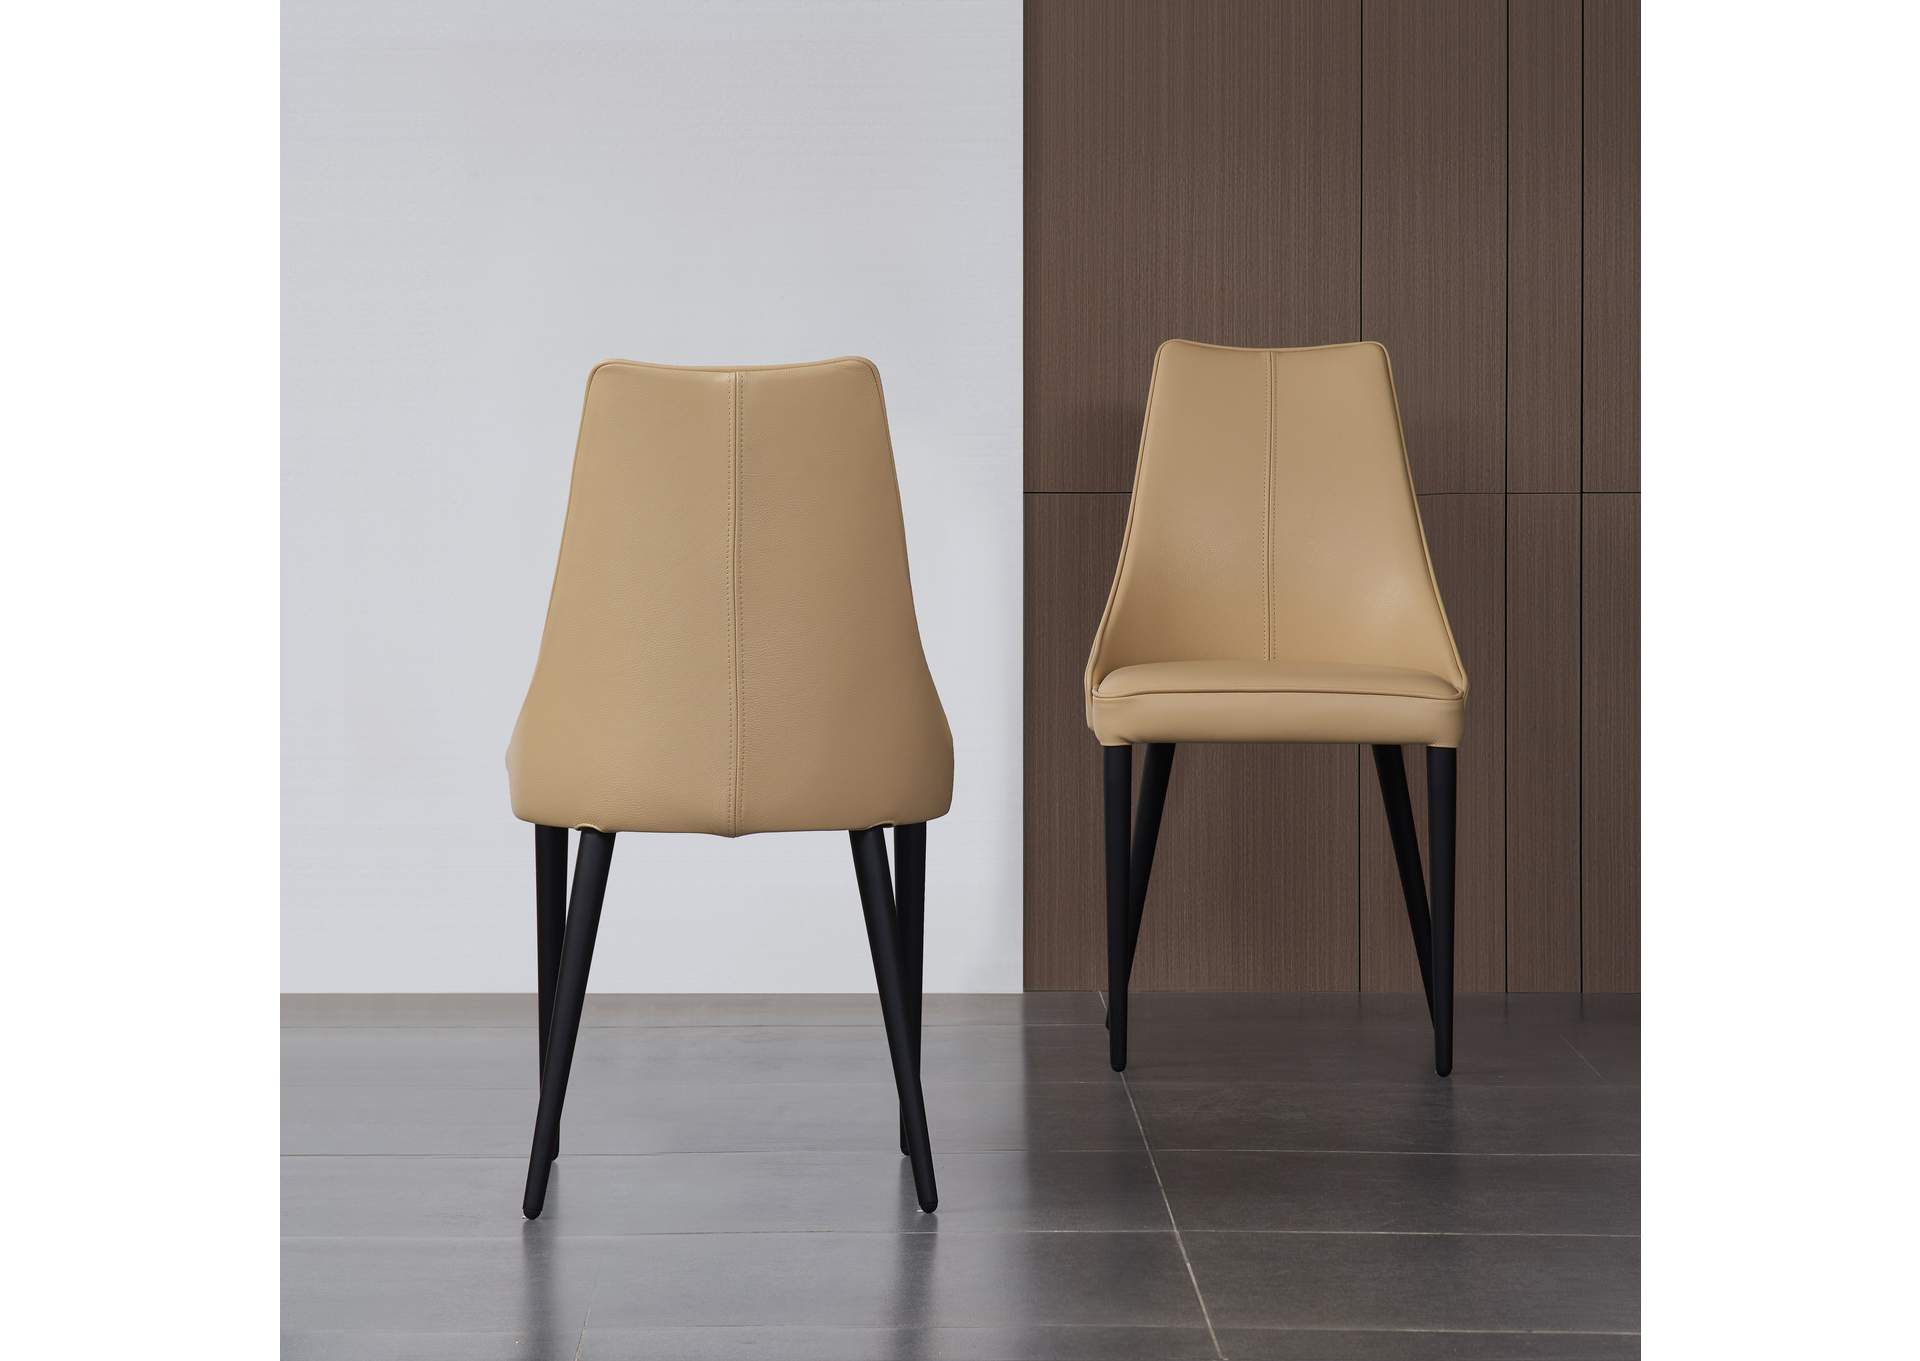 Milano Leather Dining Chair In Tan,J&M Furniture